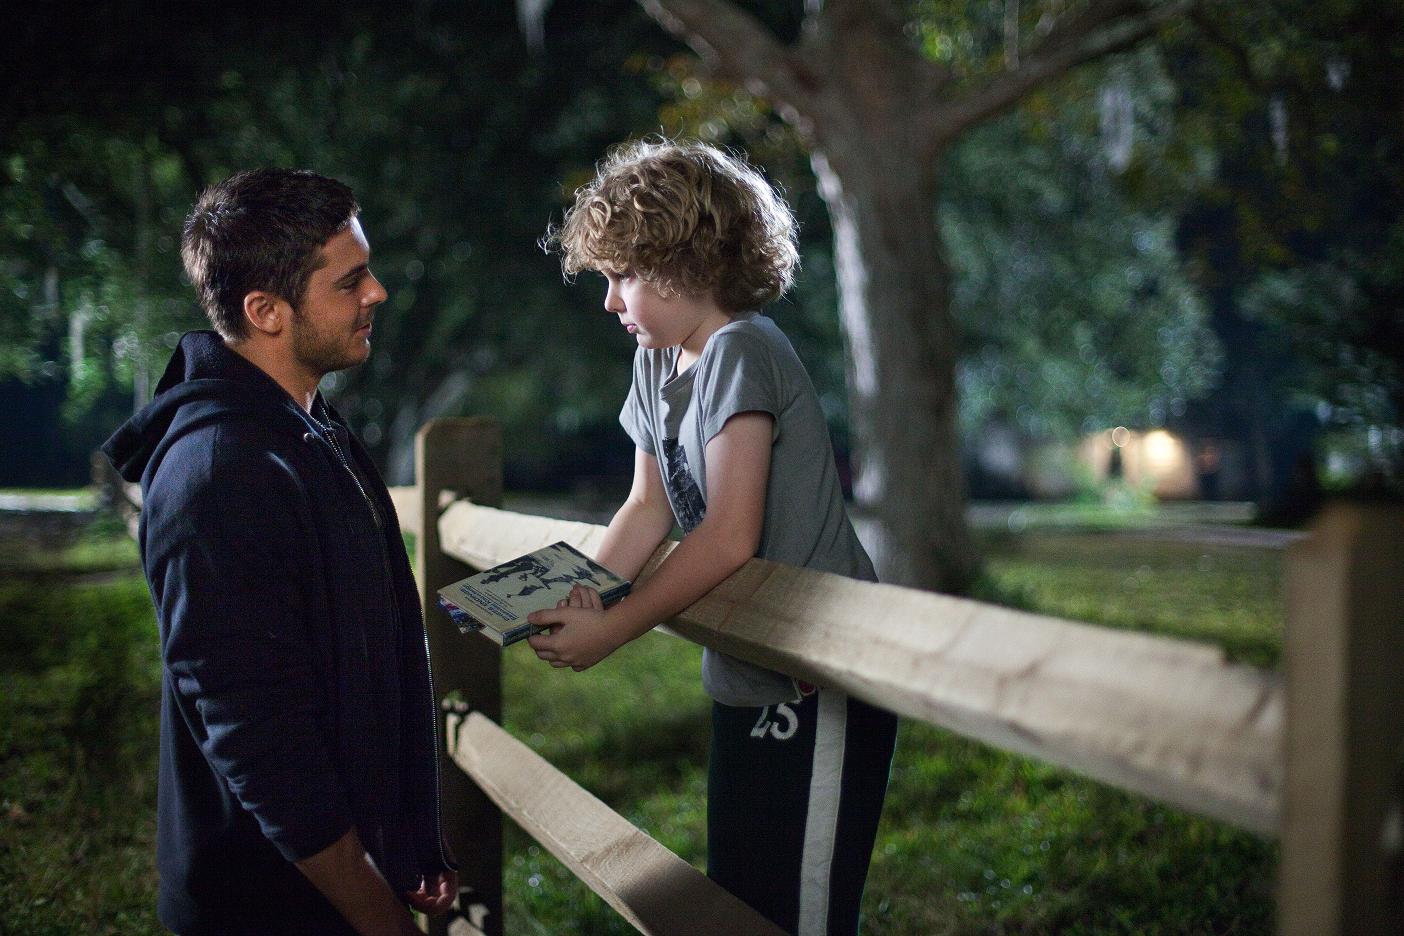 A Lucky Hit: My Thoughts on “The Lucky One”